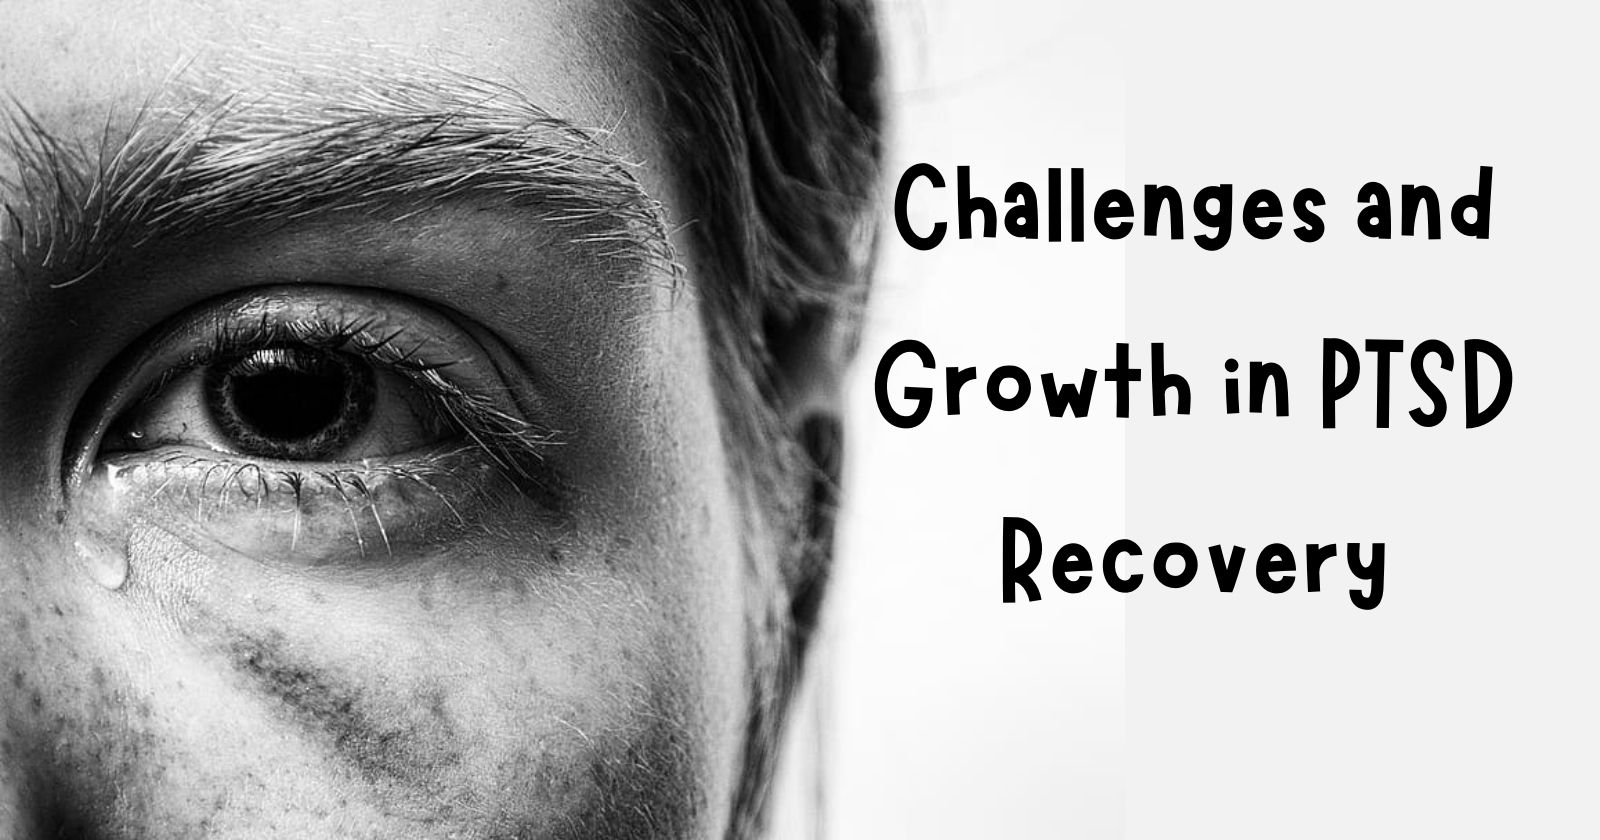 Challenges and Growth in PTSD Recovery
Sad crying Person